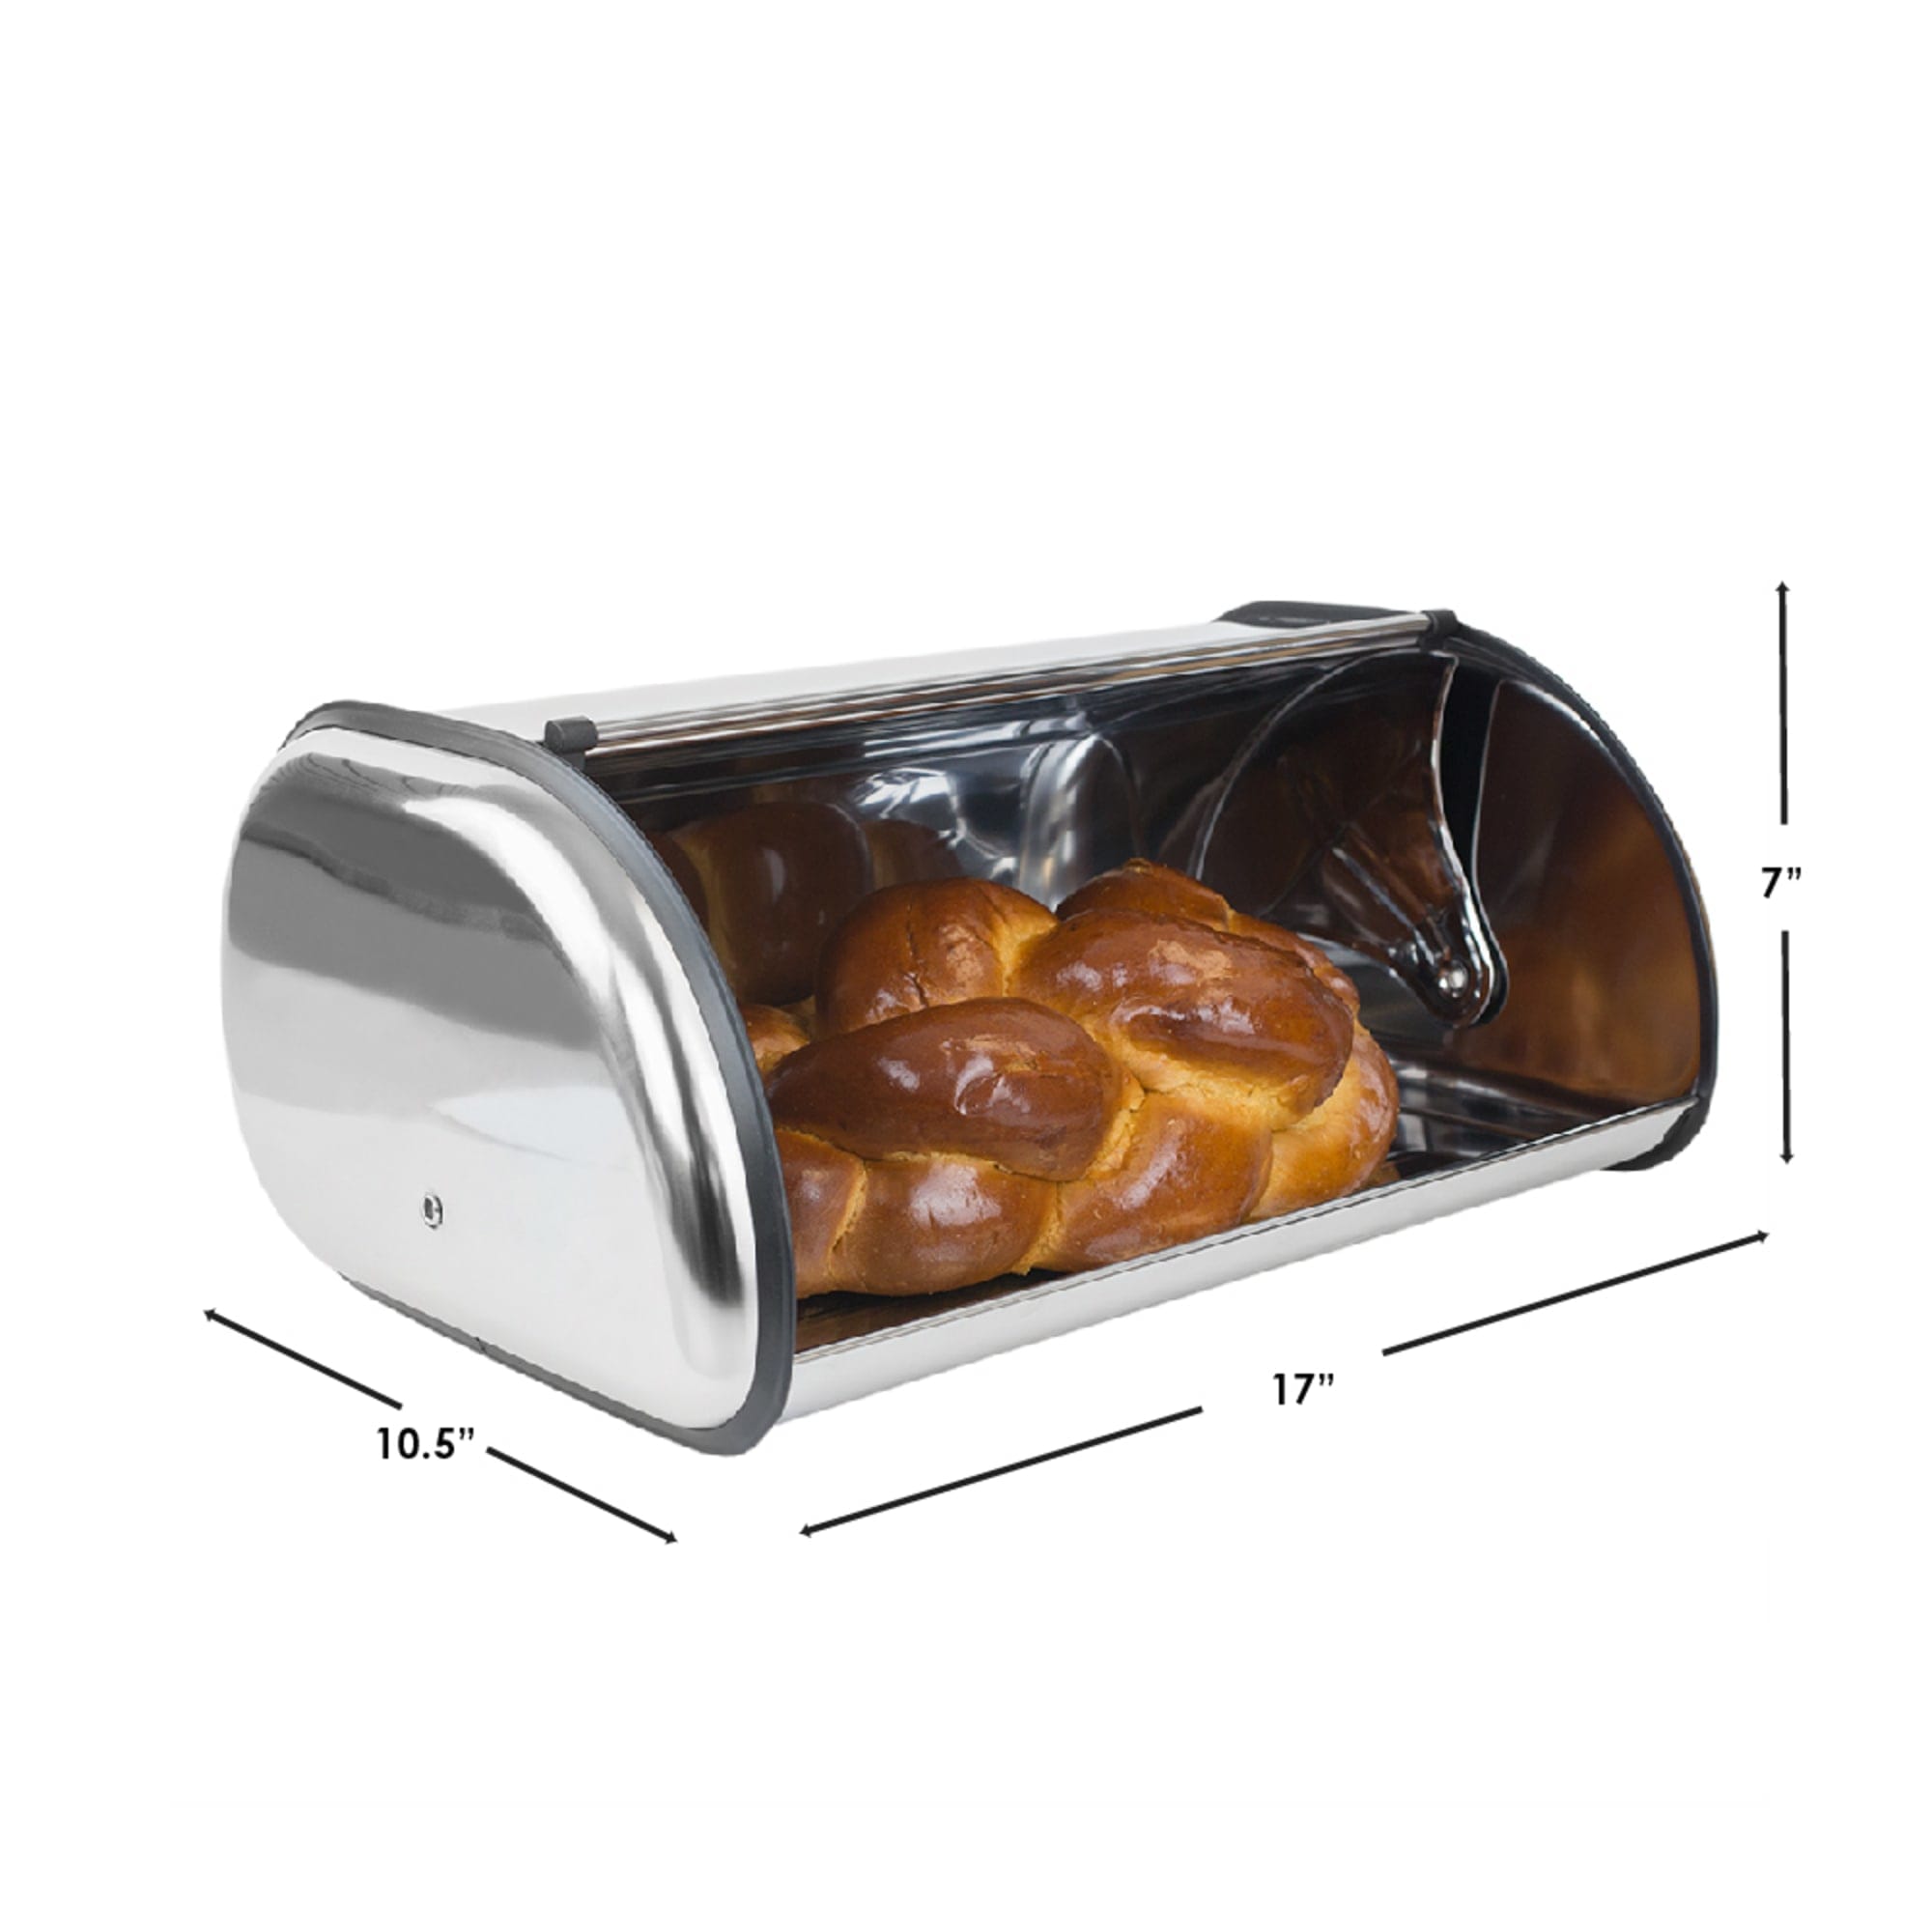 Home Basics Roll-Top Lid Stainless Steel Bread Box, Silver $20.00 EACH, CASE PACK OF 6